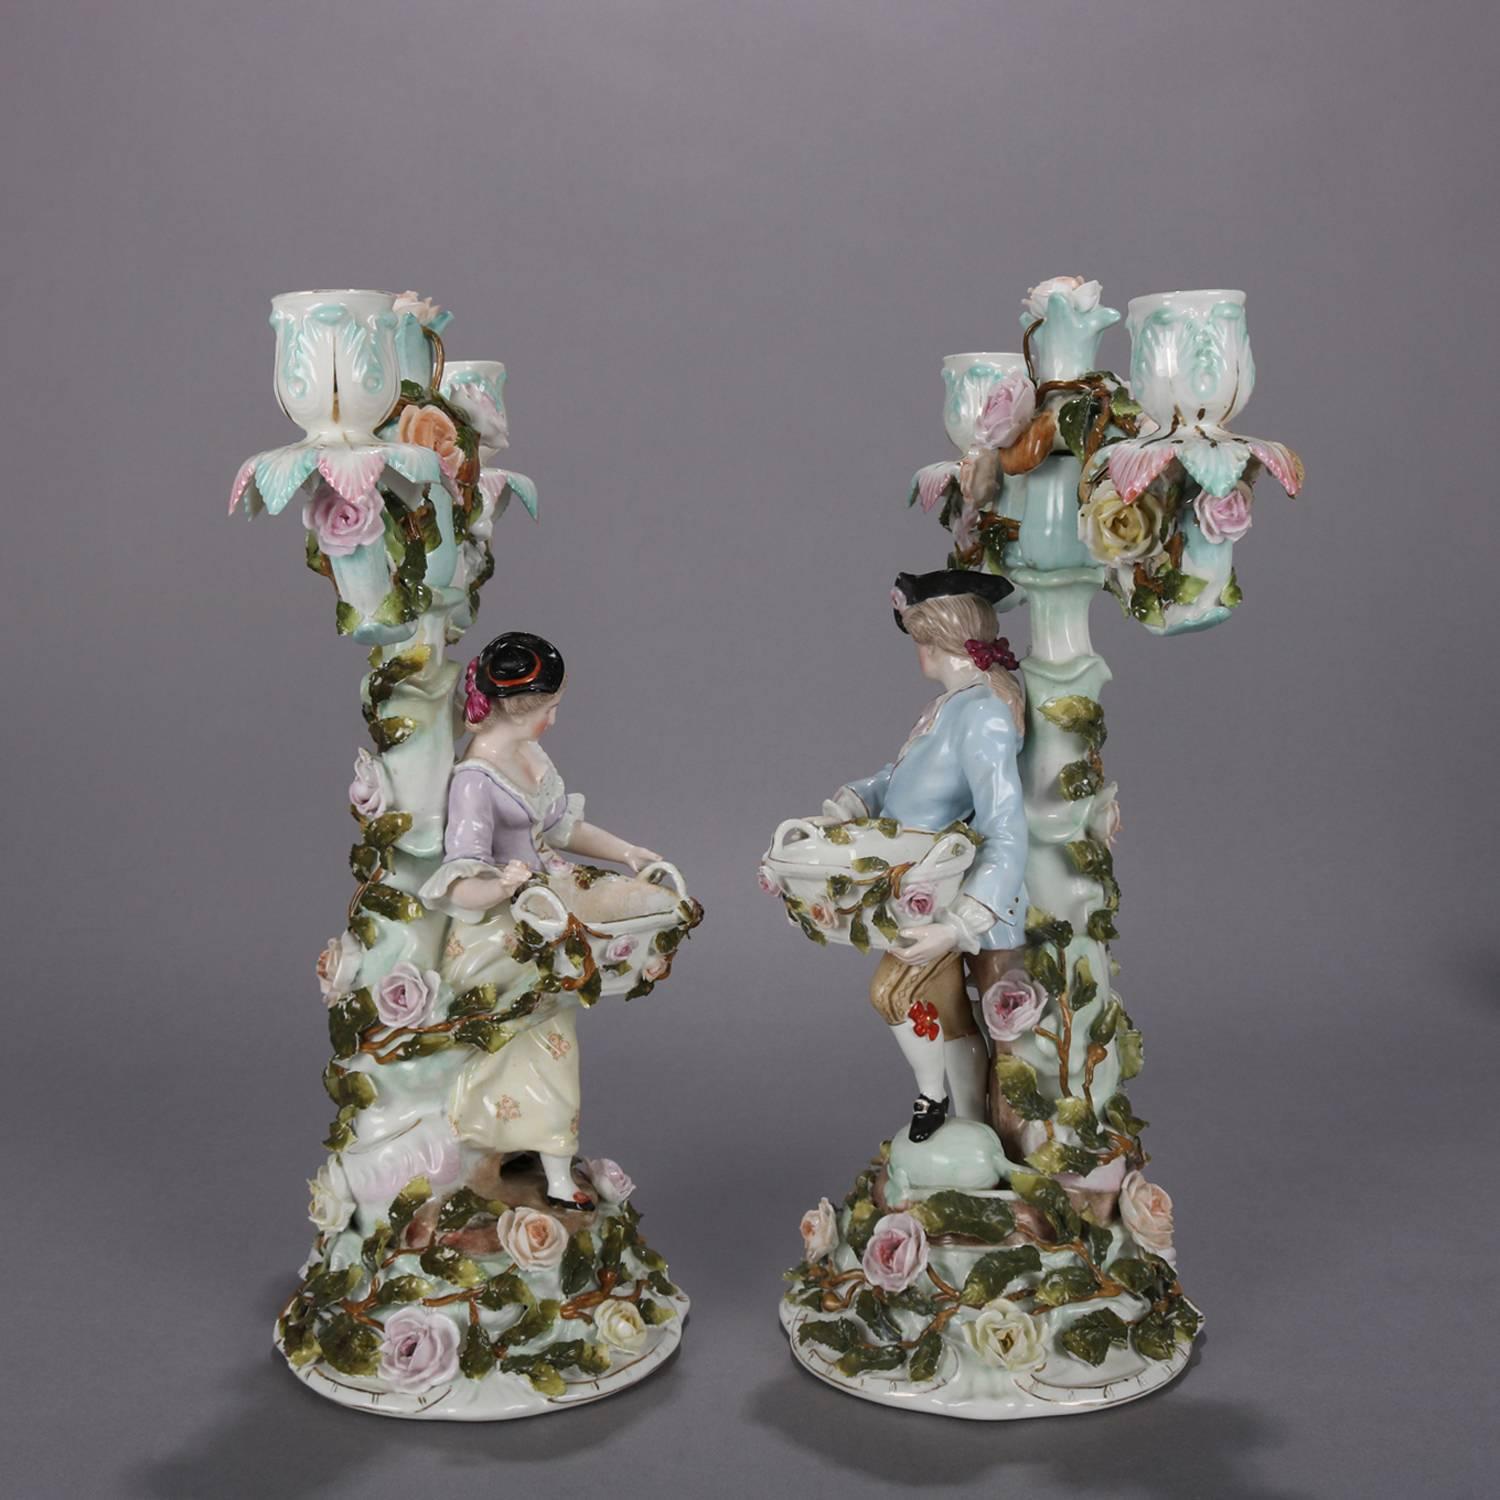 Pair of German Dresden figural porcelain candelabra feature bases with applied courting couple figures in rose garden setting raising three light candles with applied floral garland, see condition report and being sold as-is, marked 230 on base,